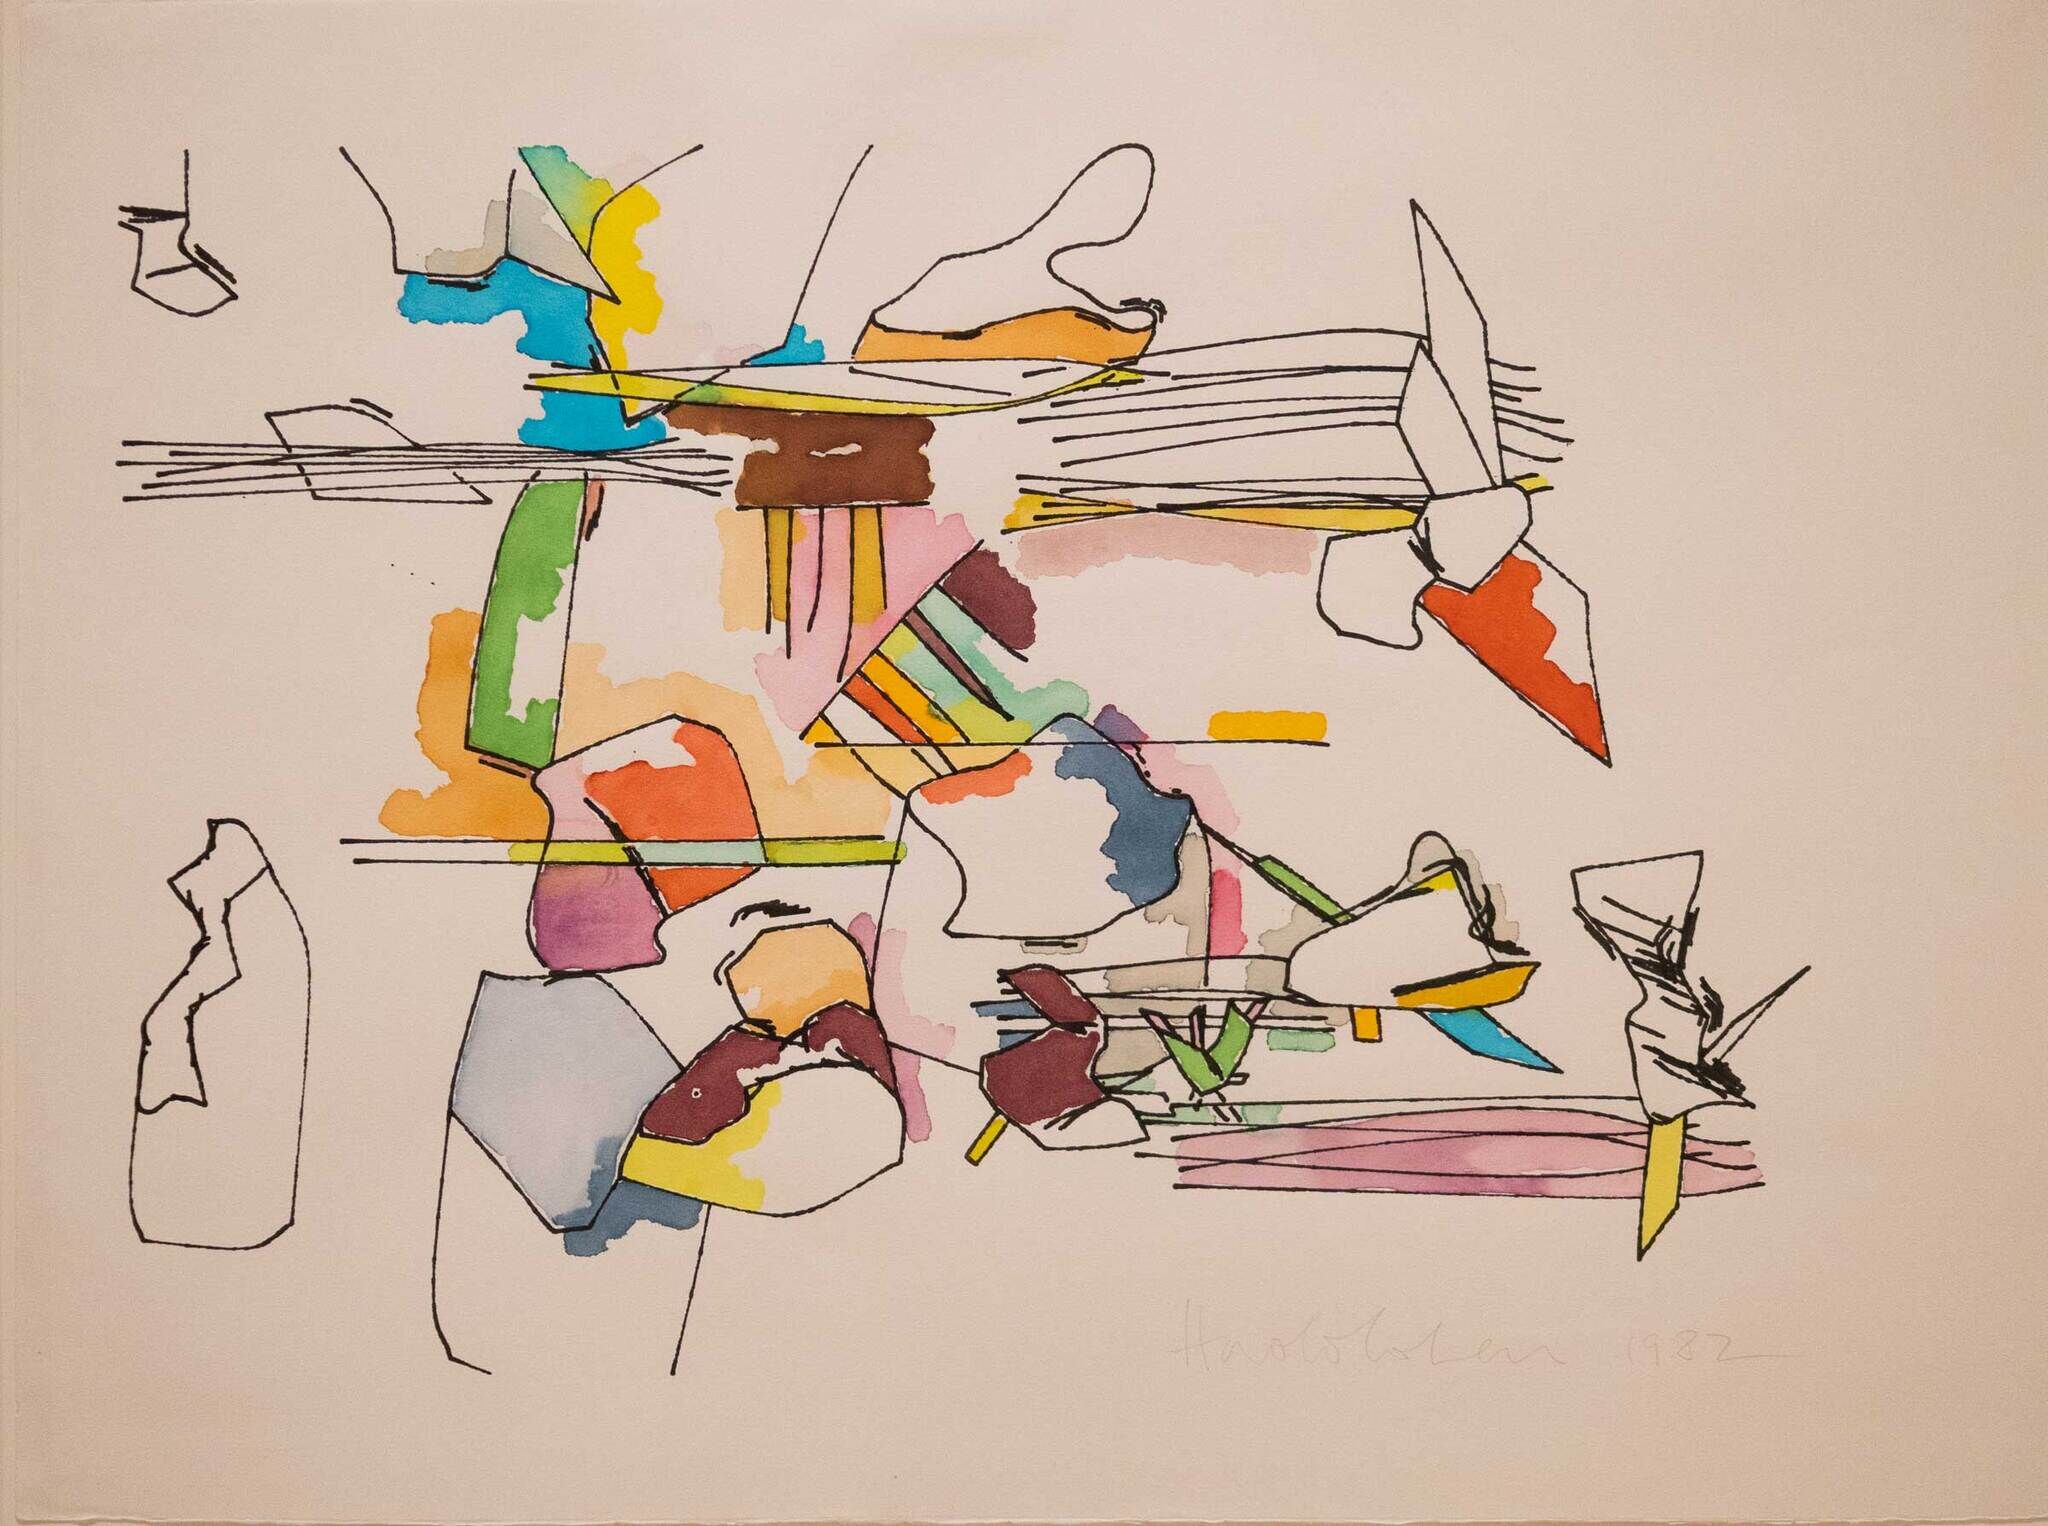 Colorful abstract artwork with various shapes and lines, signed and dated 1982.